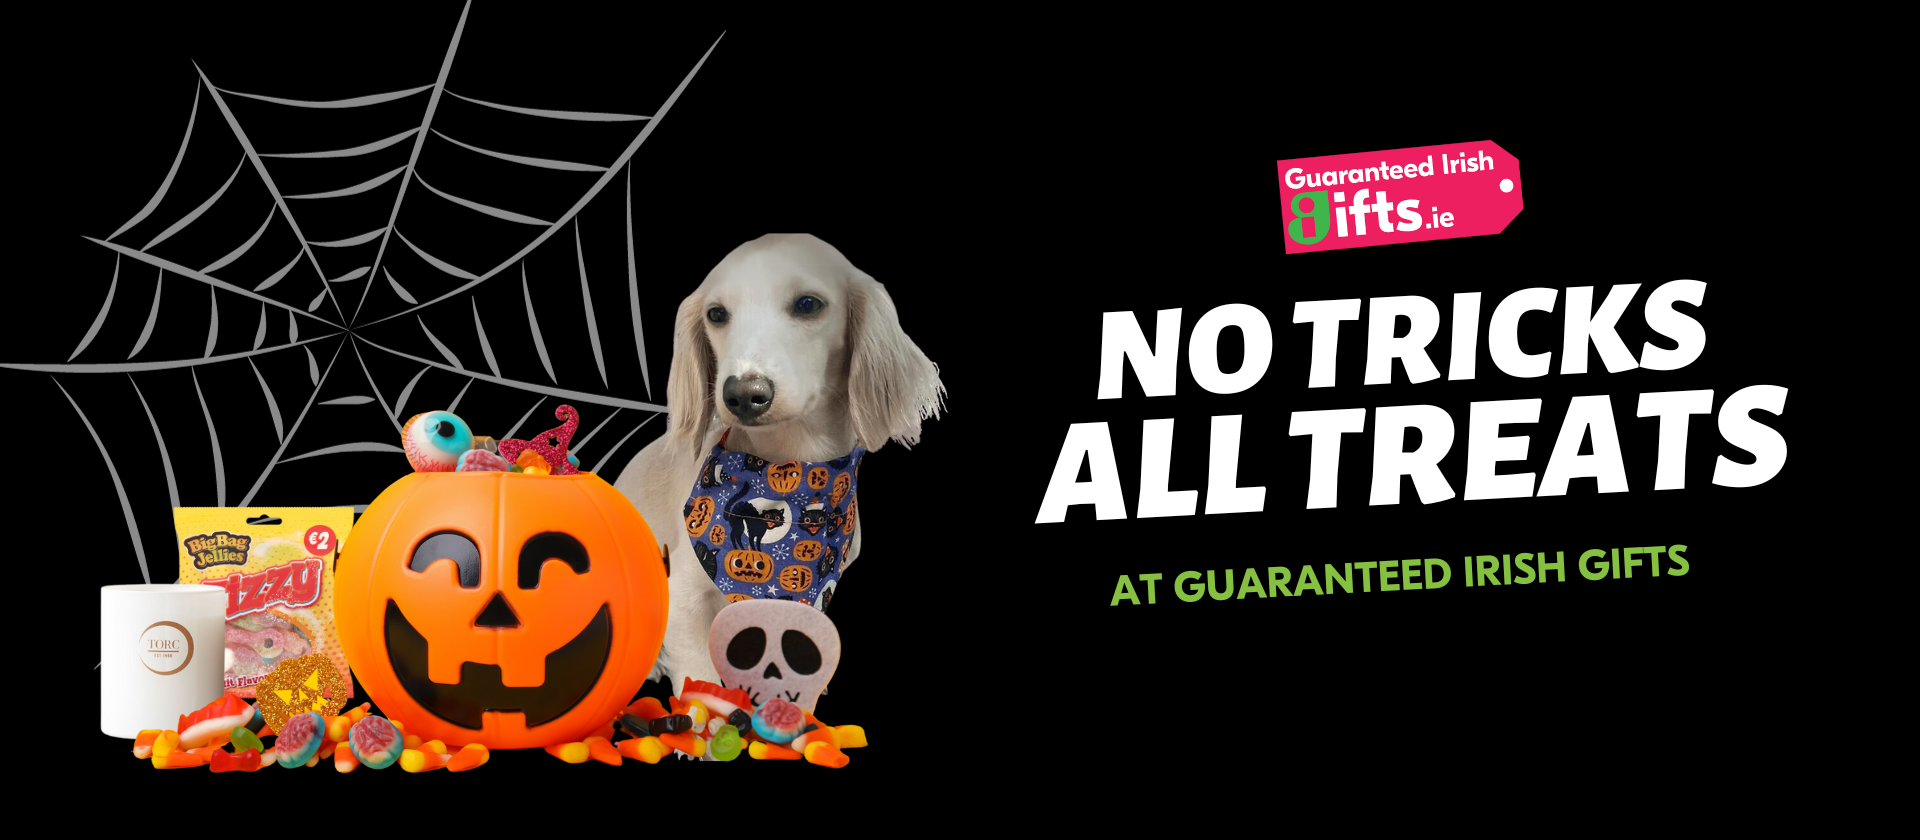 This Halloween Guaranteed Irish Gifts have you covered - No tricks, all treats!